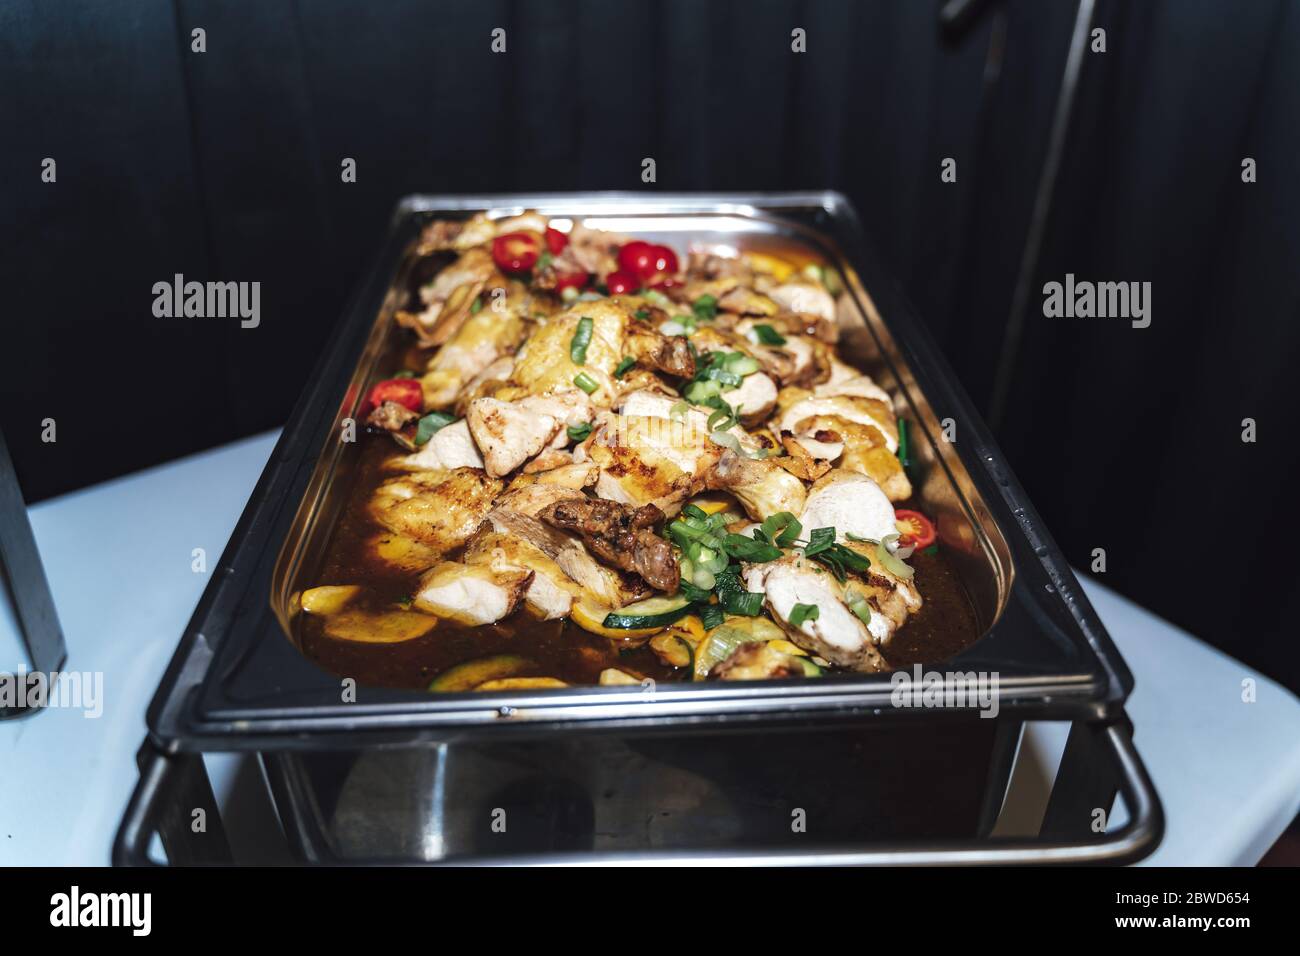 https://c8.alamy.com/comp/2BWD654/stainless-hotel-pan-on-food-warmer-with-roasted-meat-pieces-and-vegetable-self-service-buffet-table-celebration-party-birthday-or-wedding-concept-2BWD654.jpg